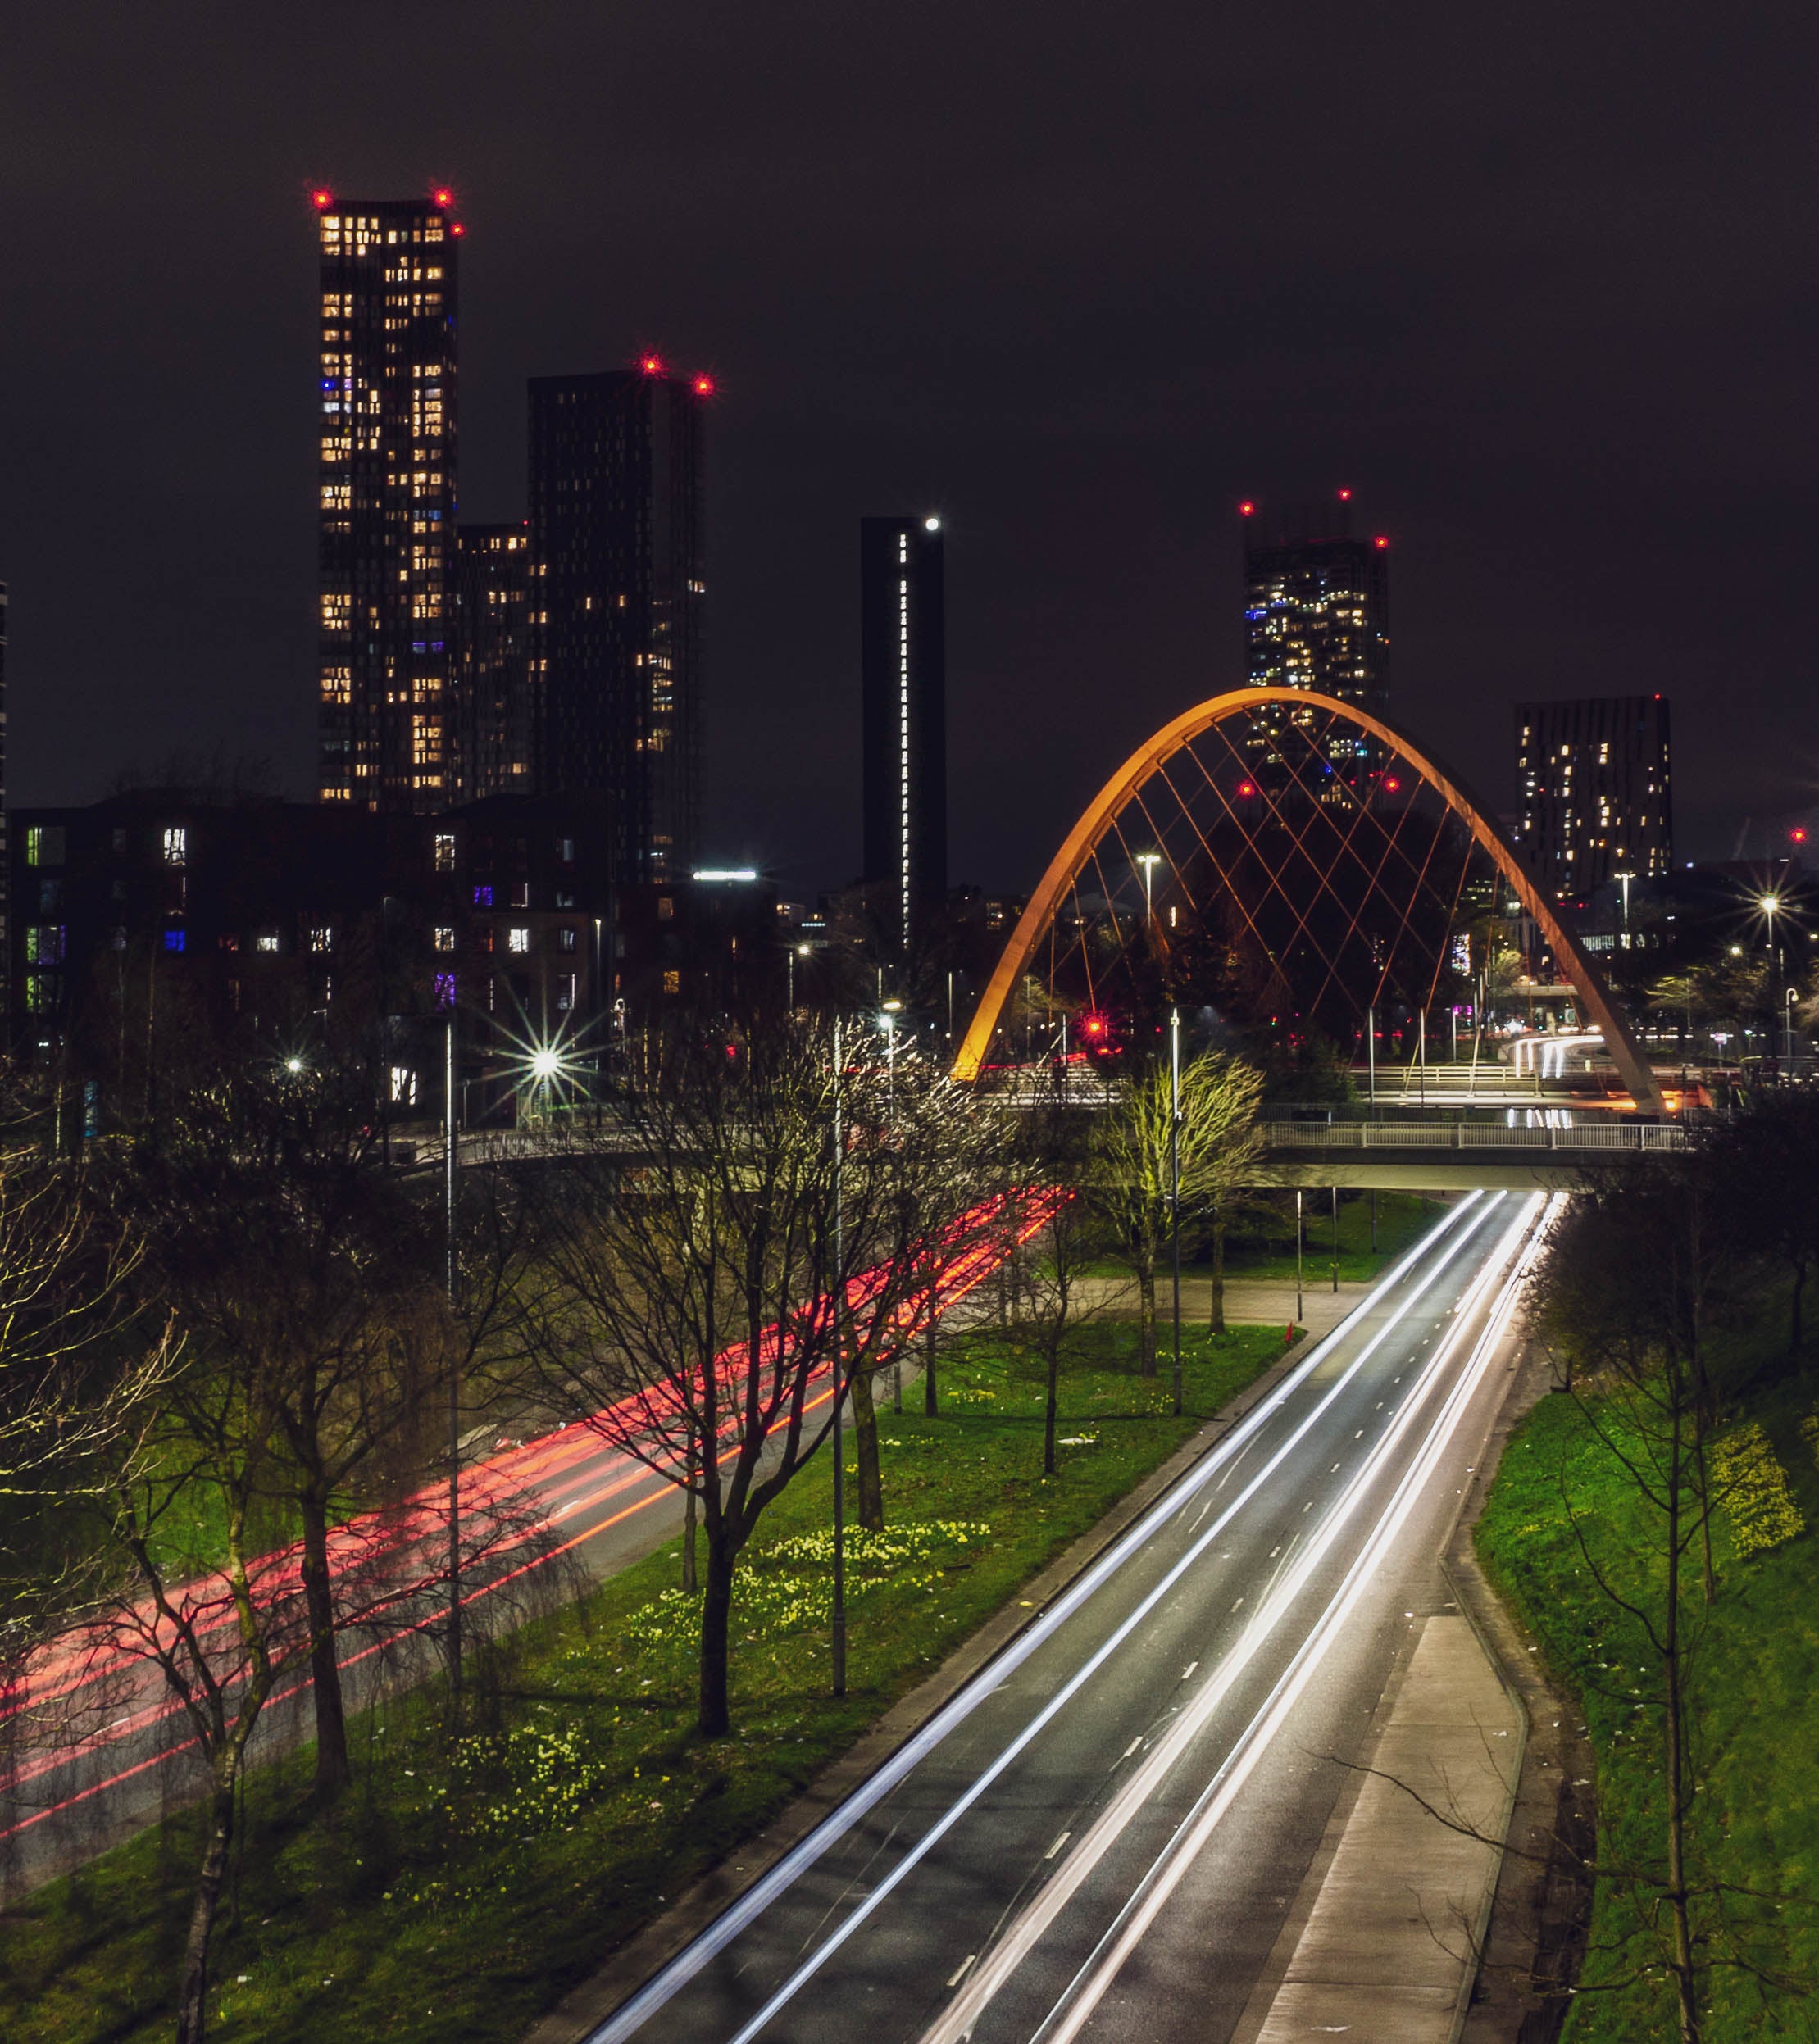 Hulme in Greater Manchester, home to the iconic Hulme Arch Bridge, made it second on the list of locations in the UK with the highest rising house prices